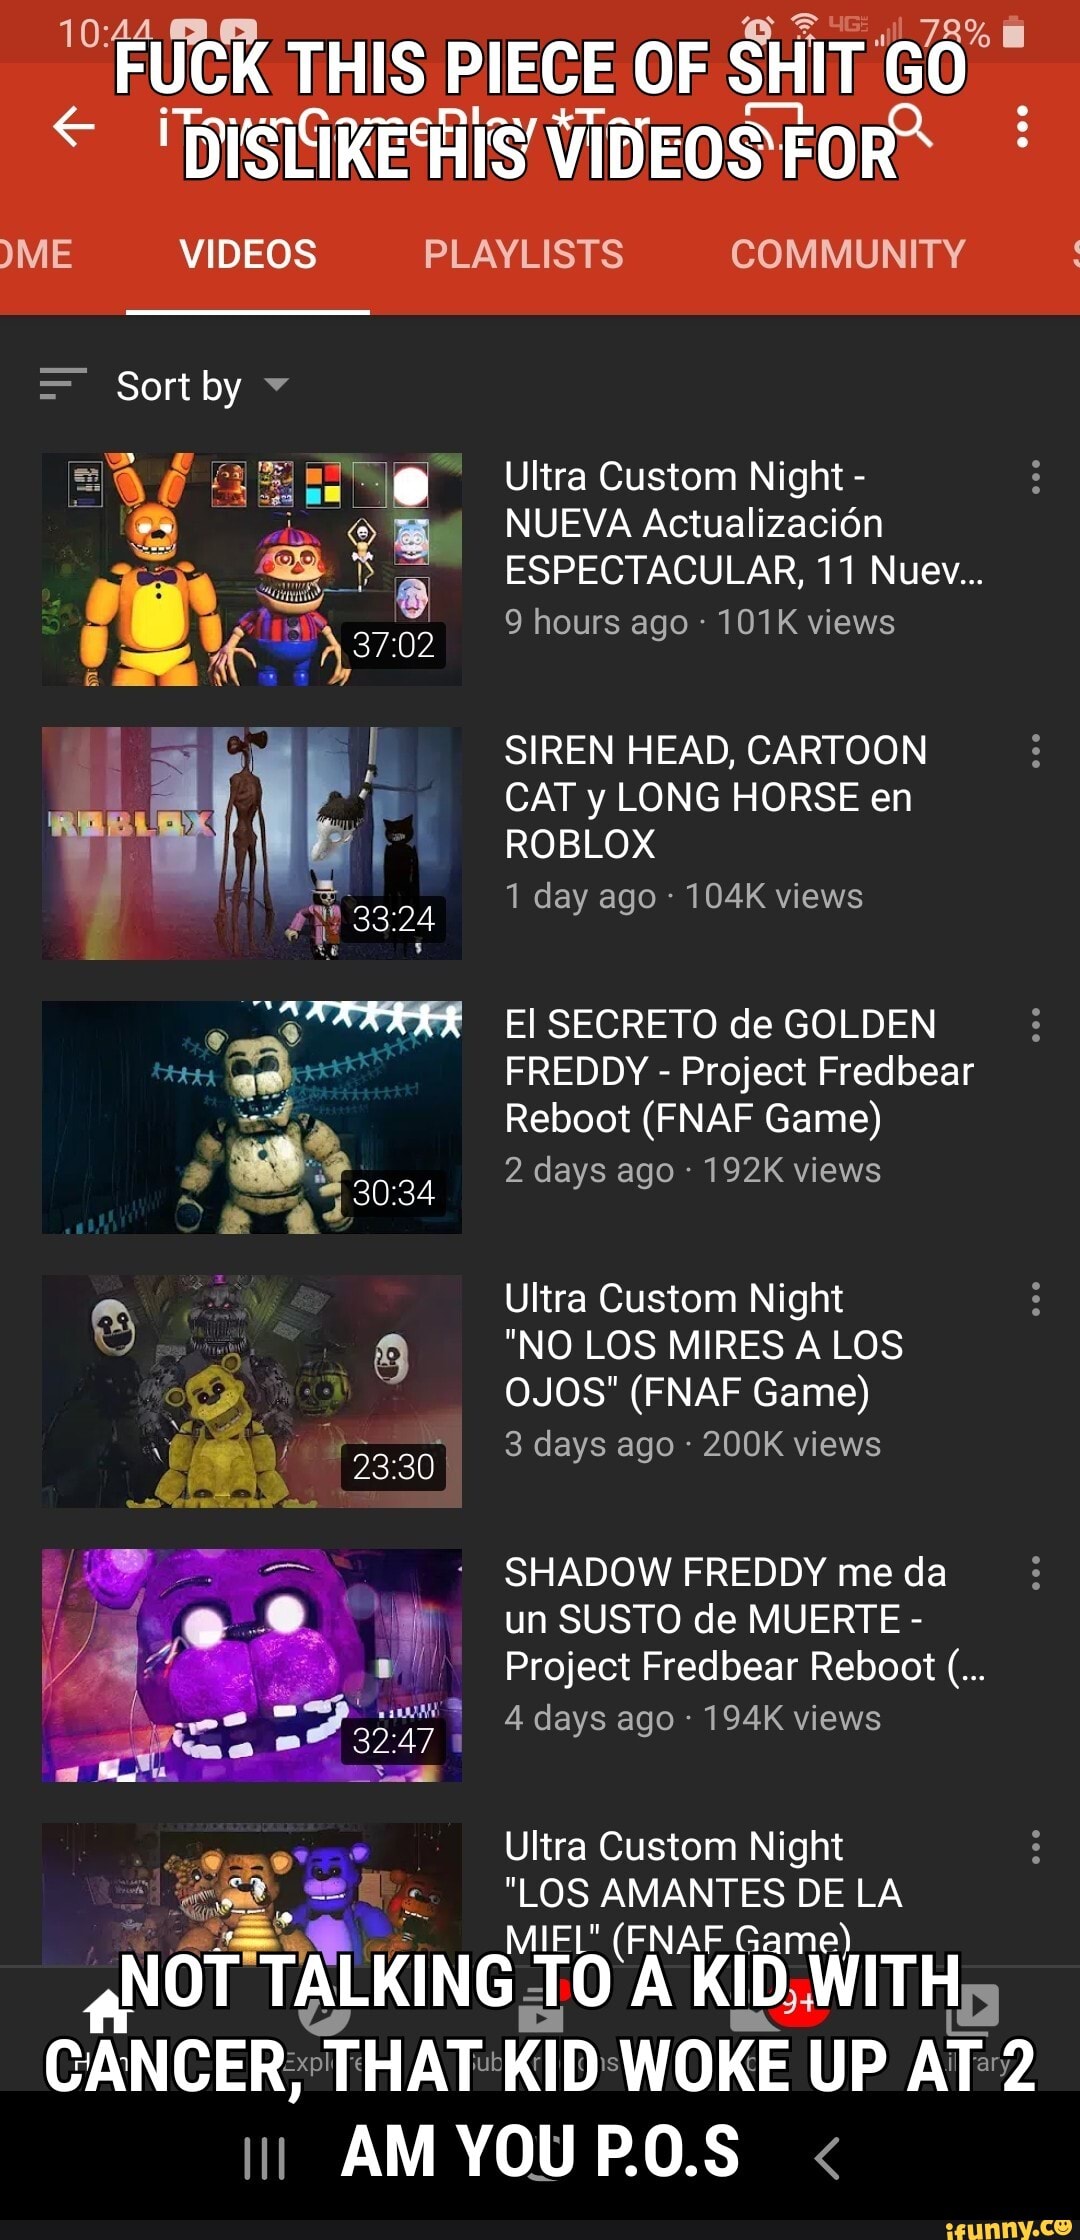 fredbear and frenc rebot full chapter 2